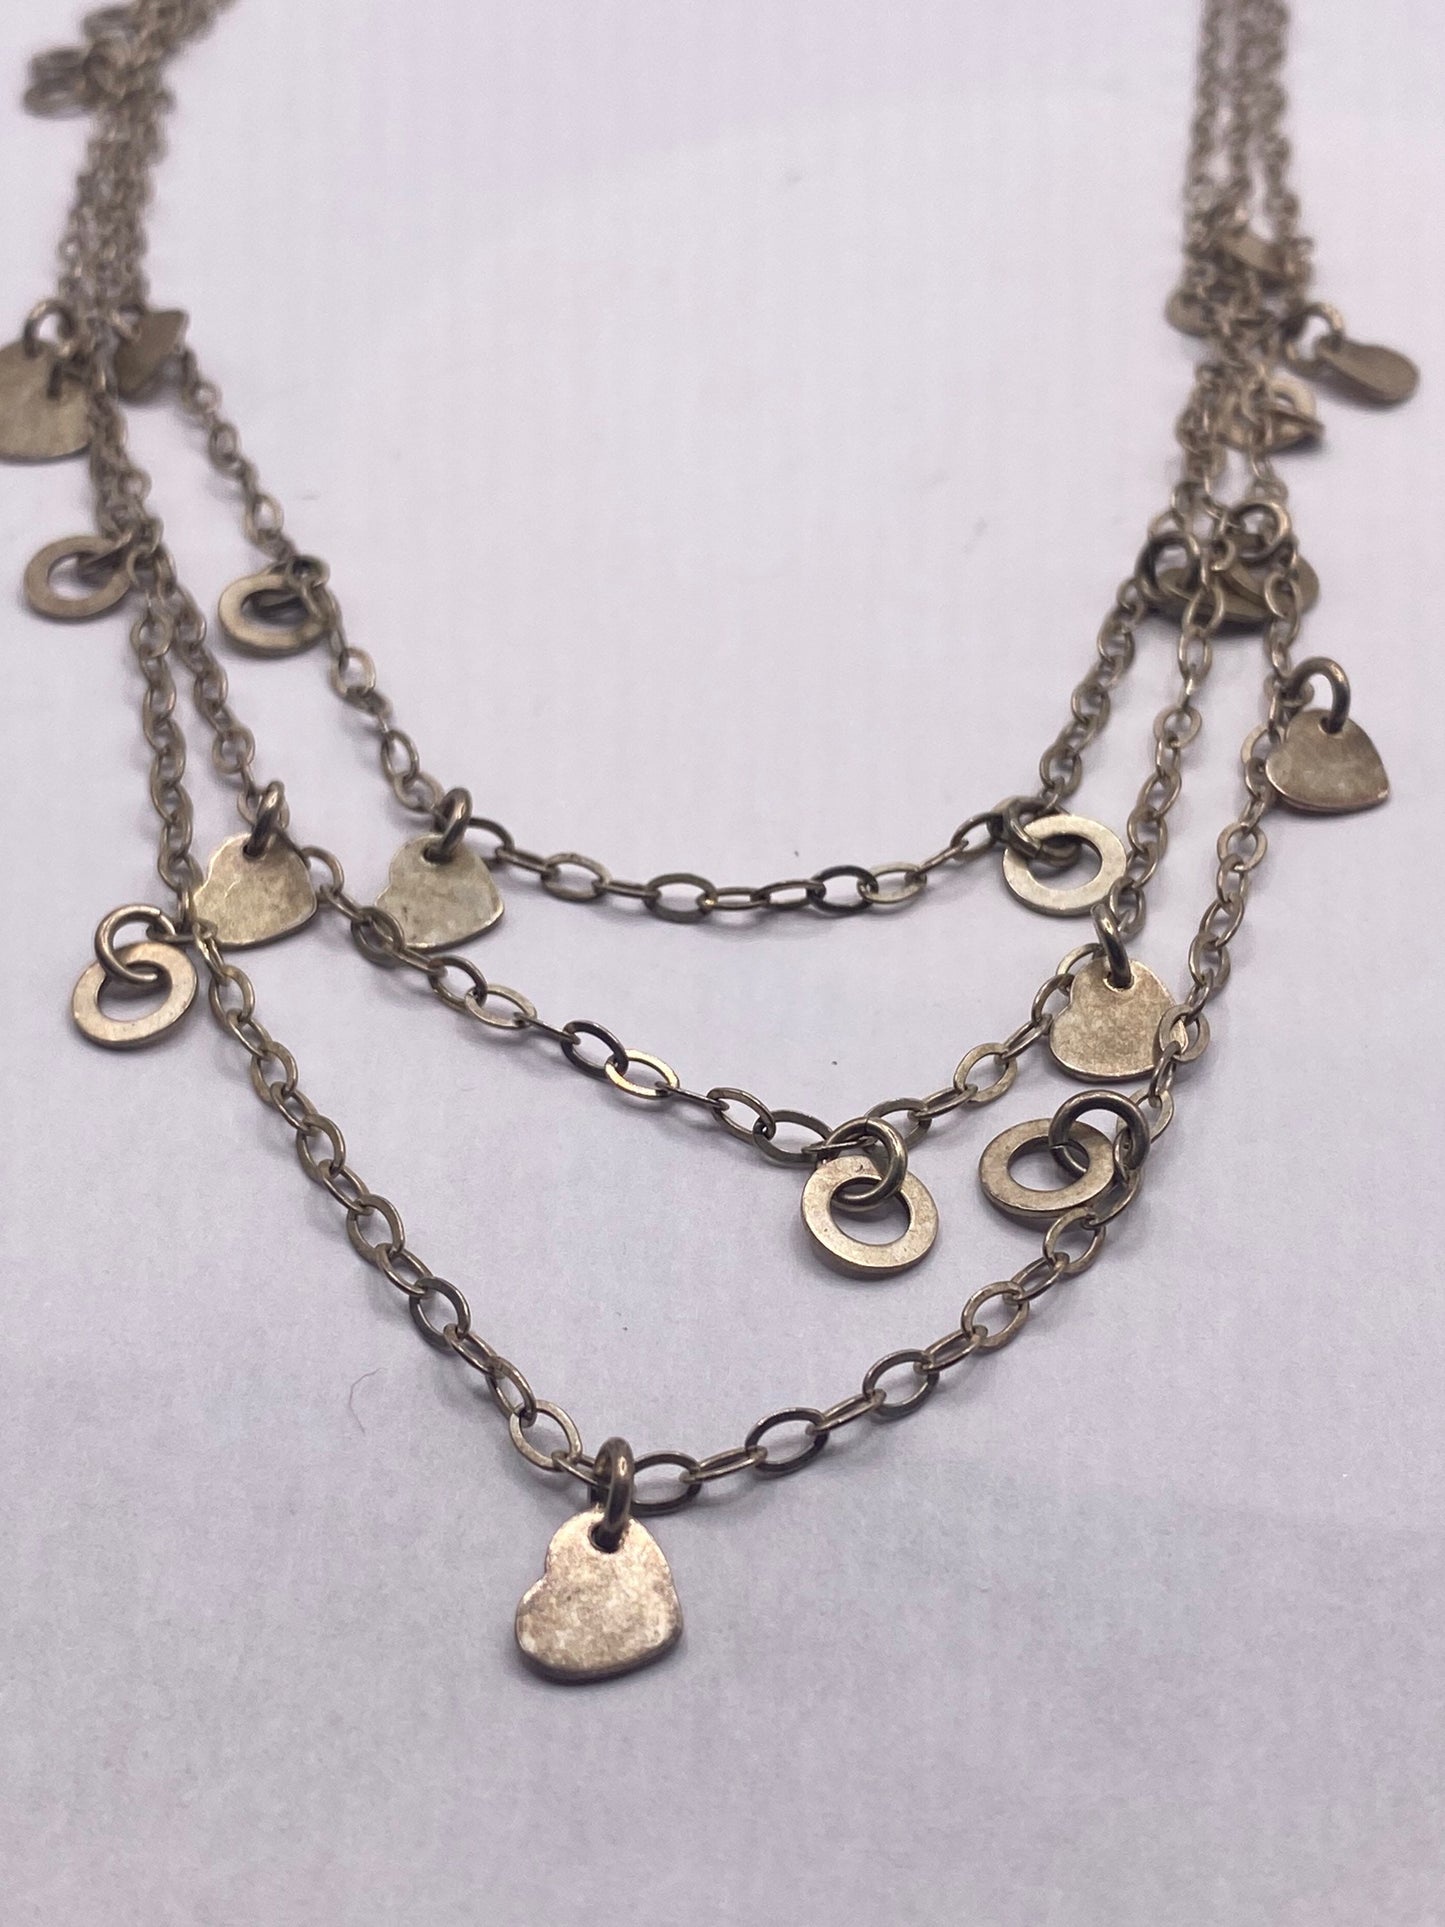 Vintage 925 Sterling Silver Heart Pendant 16 inch Charm necklace